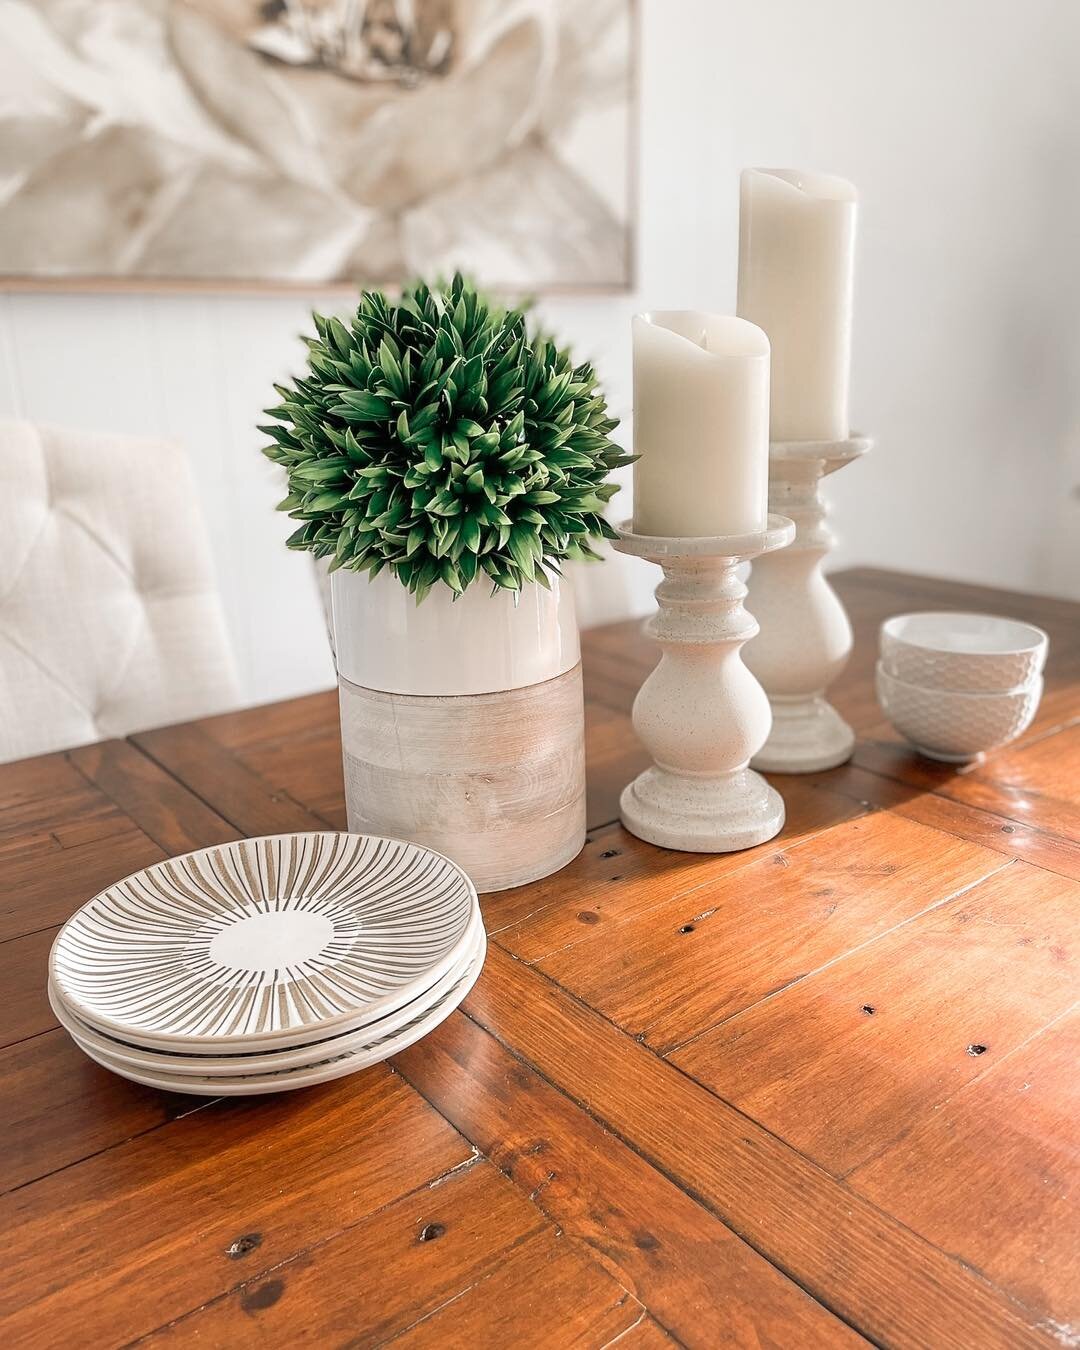 Neutrals don&rsquo;t have to be dull!!!! They can give a fresh and crisp look perfect for Spring.
 Art from Streamline Art

#thepowerofstaging #home #homestaging #homestager #homestagingworks #homestagingsells #staging #diningroom #diningroomdecor #d